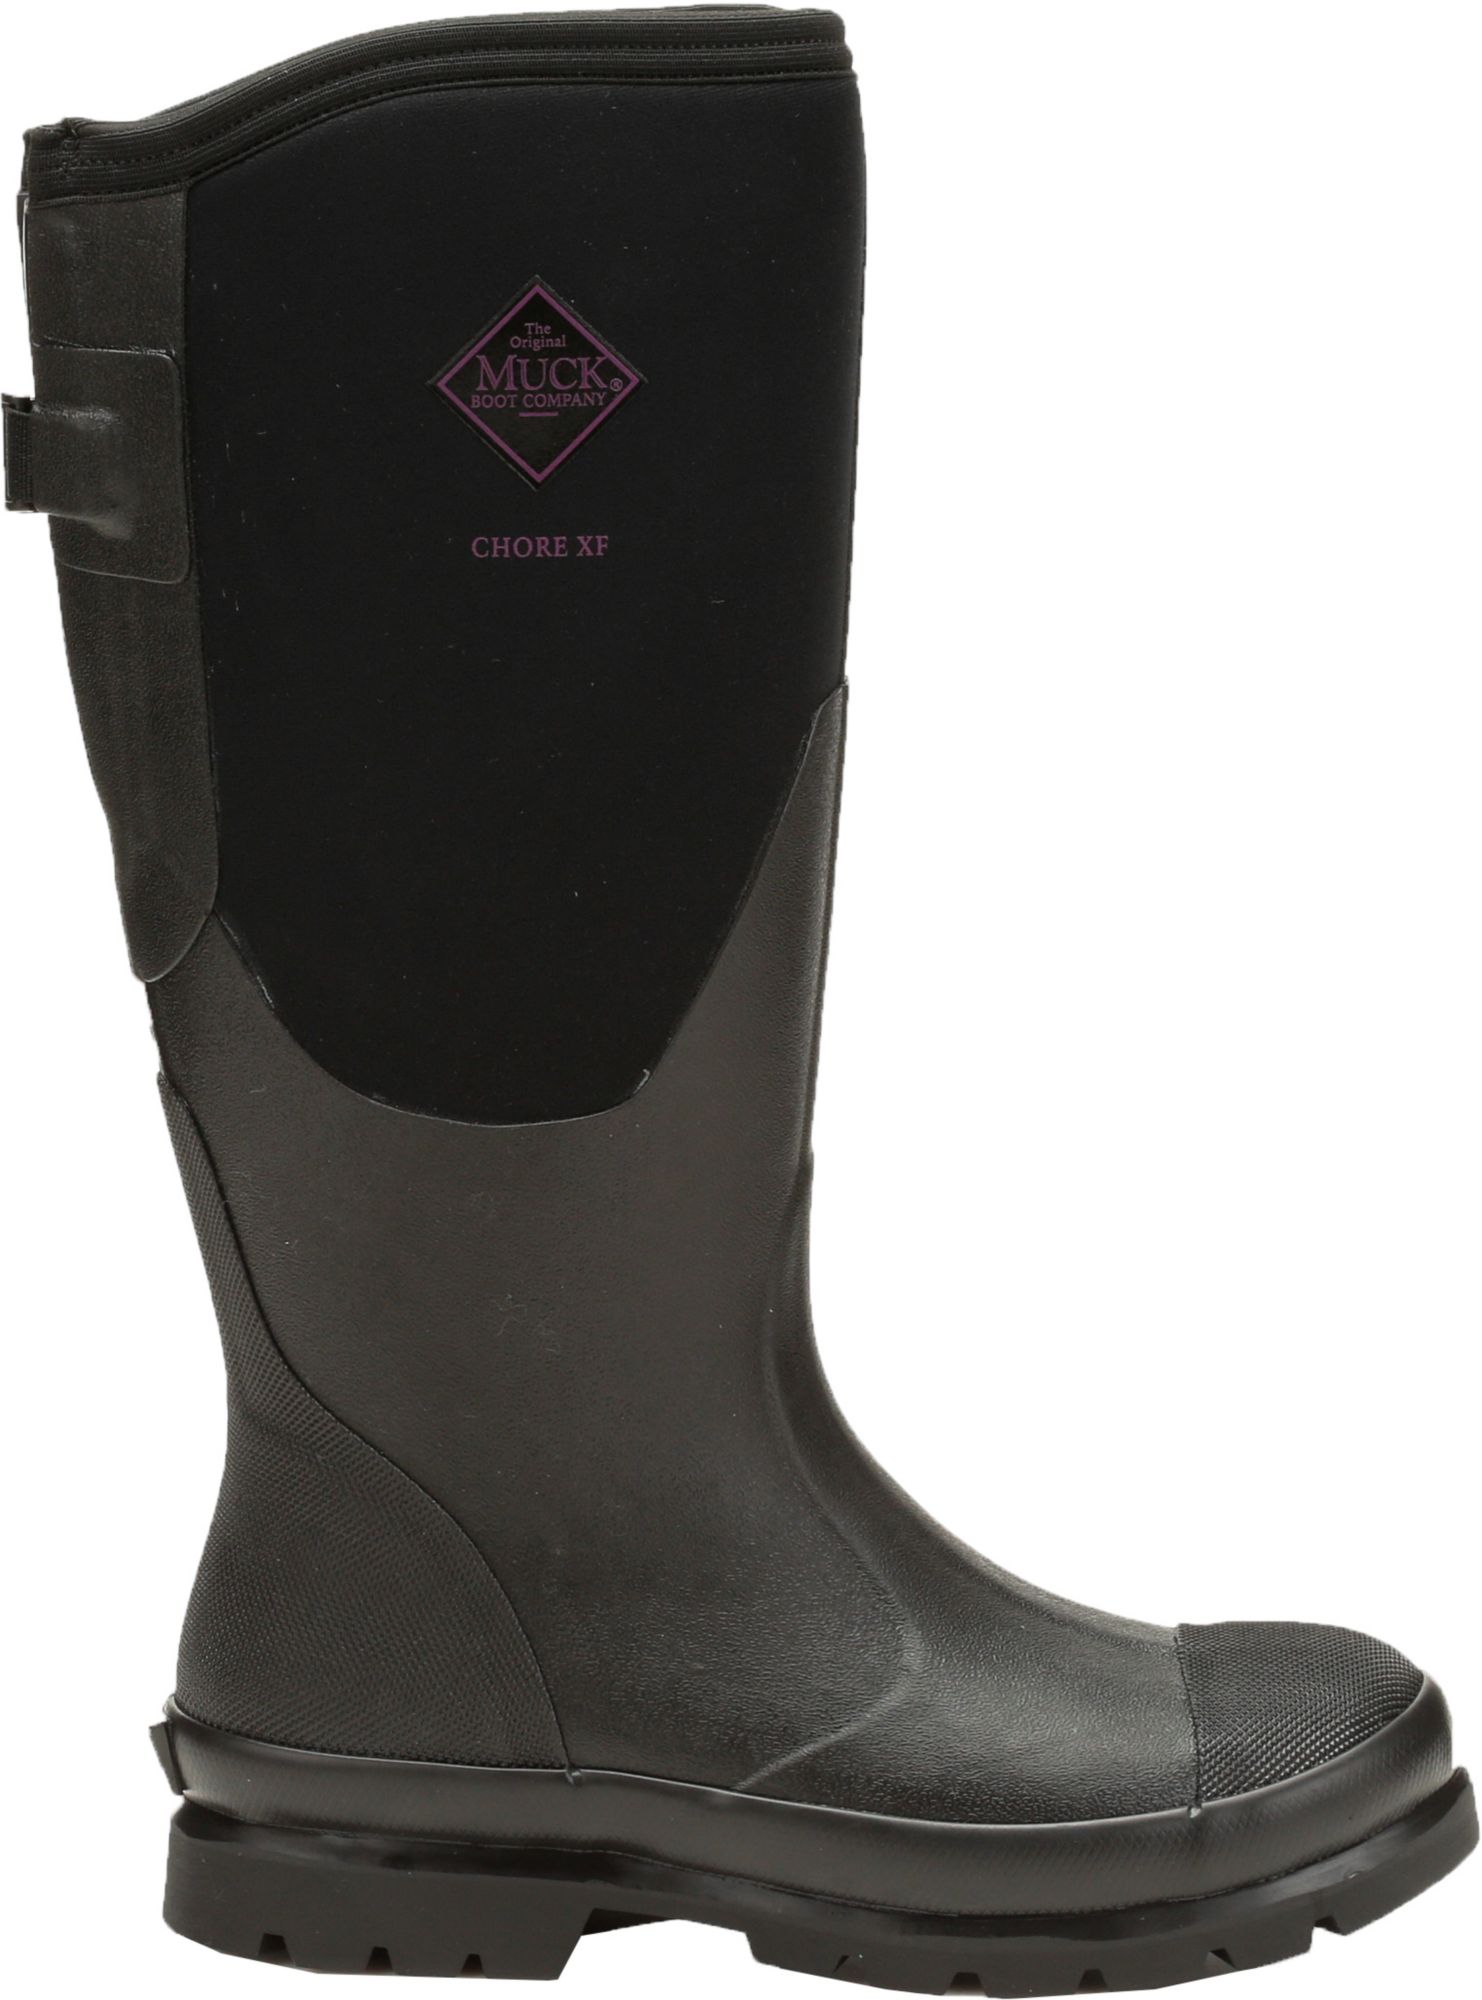 Muck Boots Women's Chore Extended Fit 